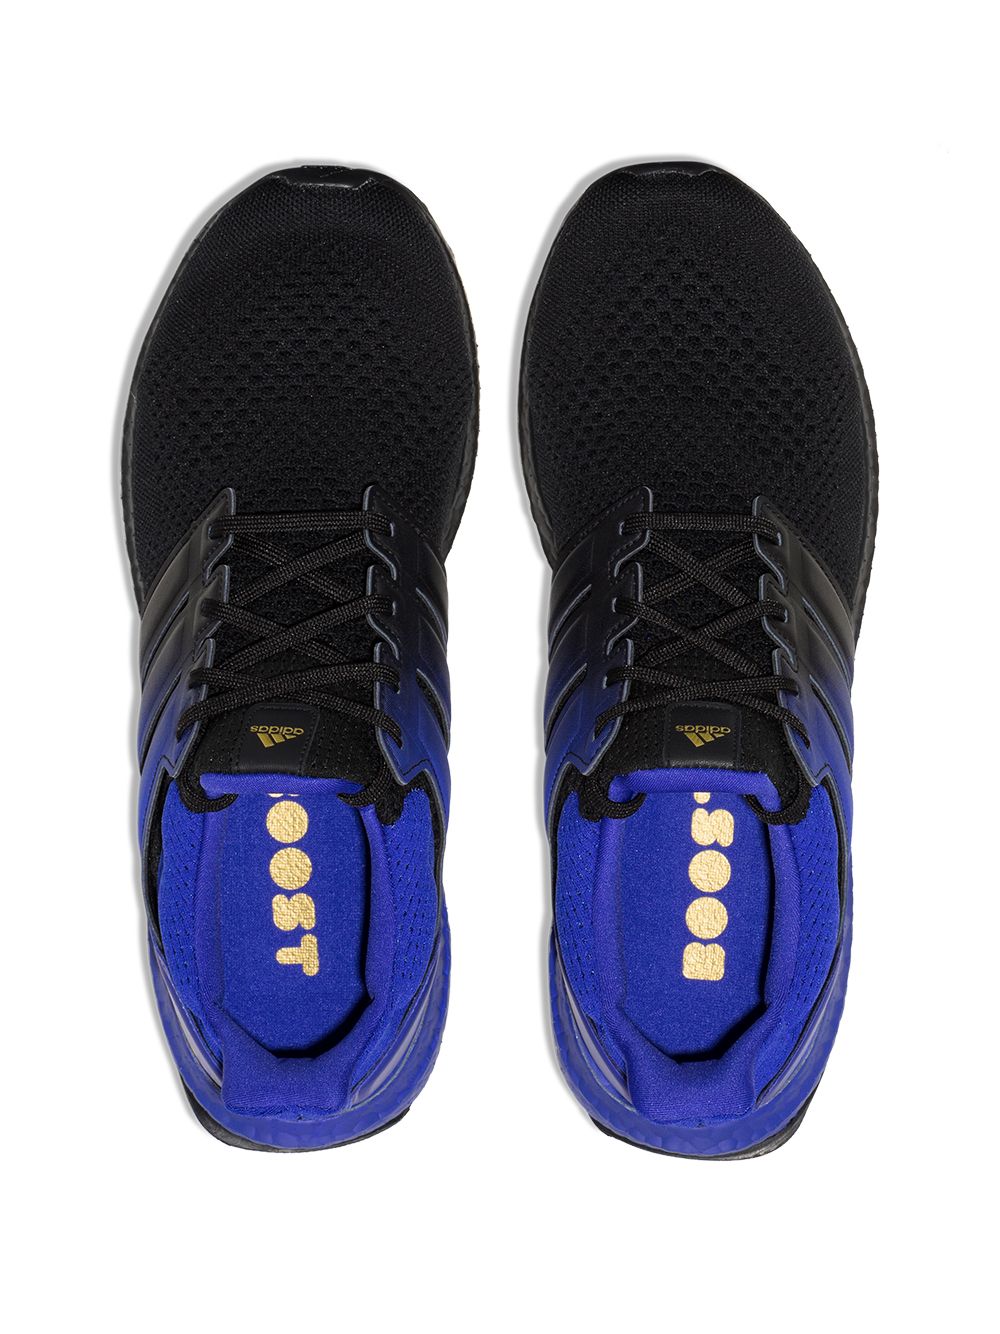 фото Adidas black and blue ultraboost dna sneakers